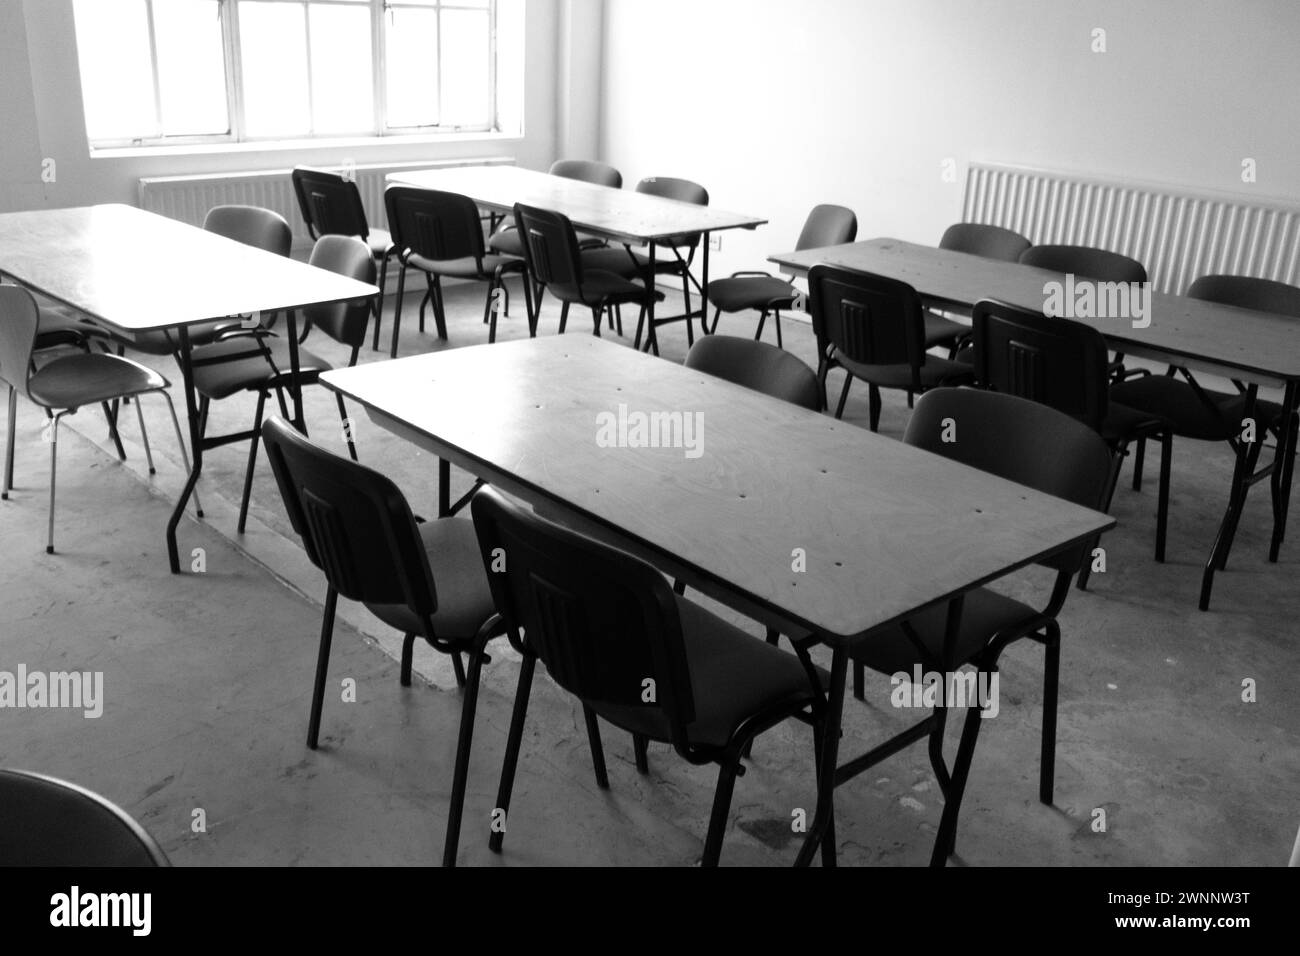 Empty Desolote Classroom With Empty Desk and Seats Stock Photo